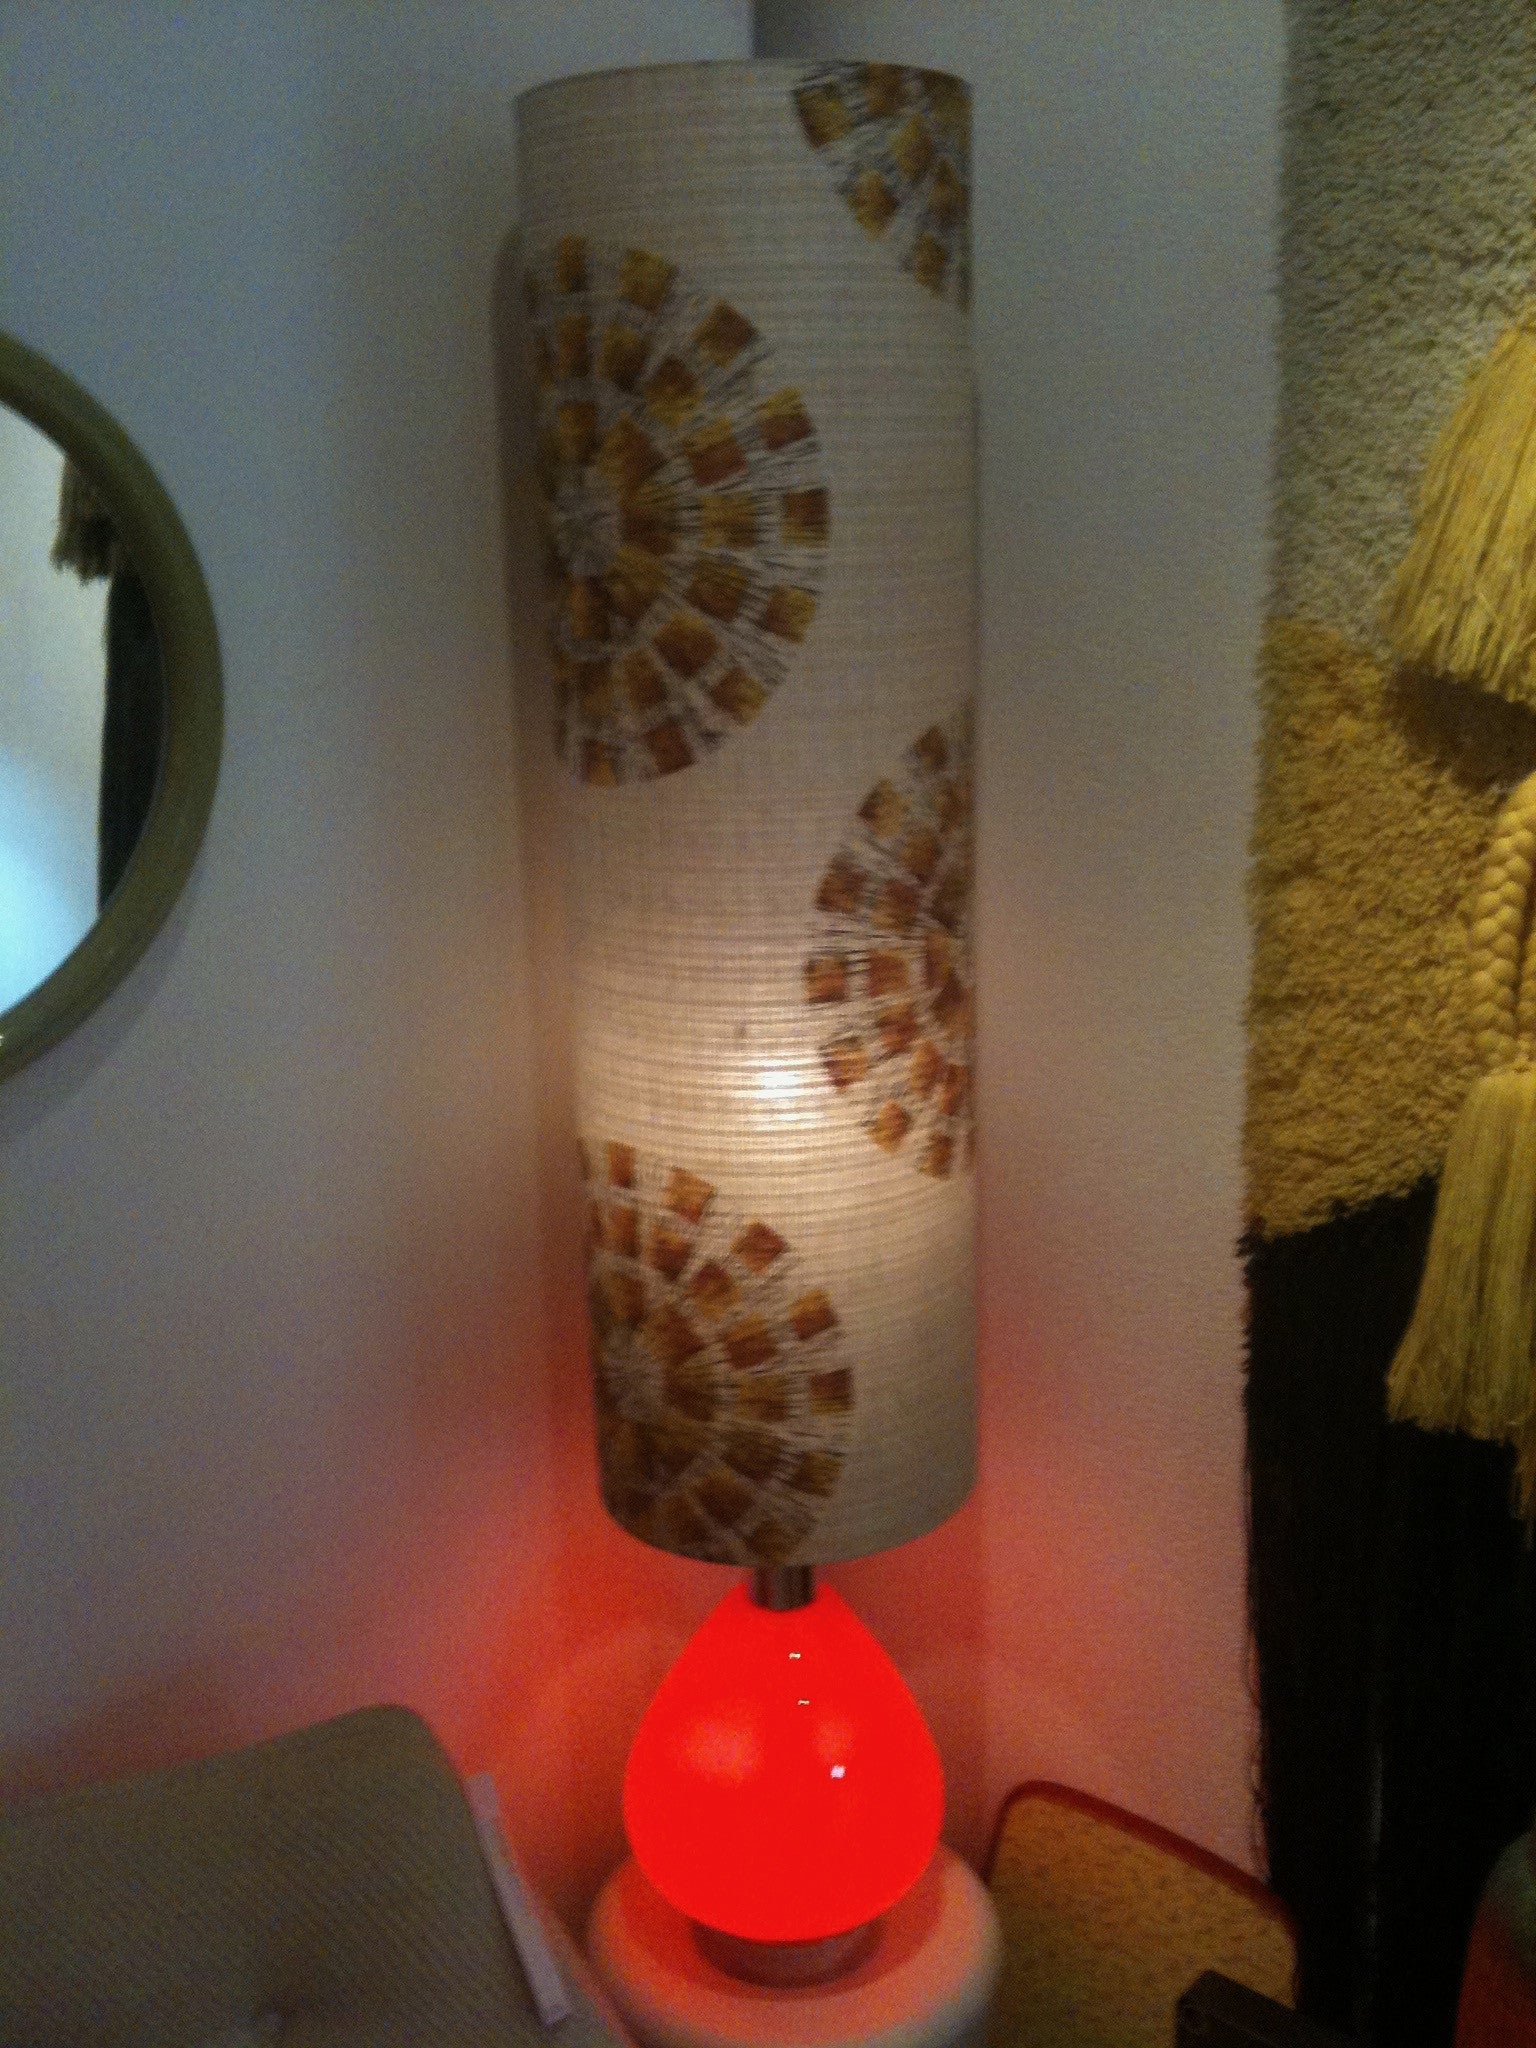 Vintage 60s Murano glass table lamp #1027